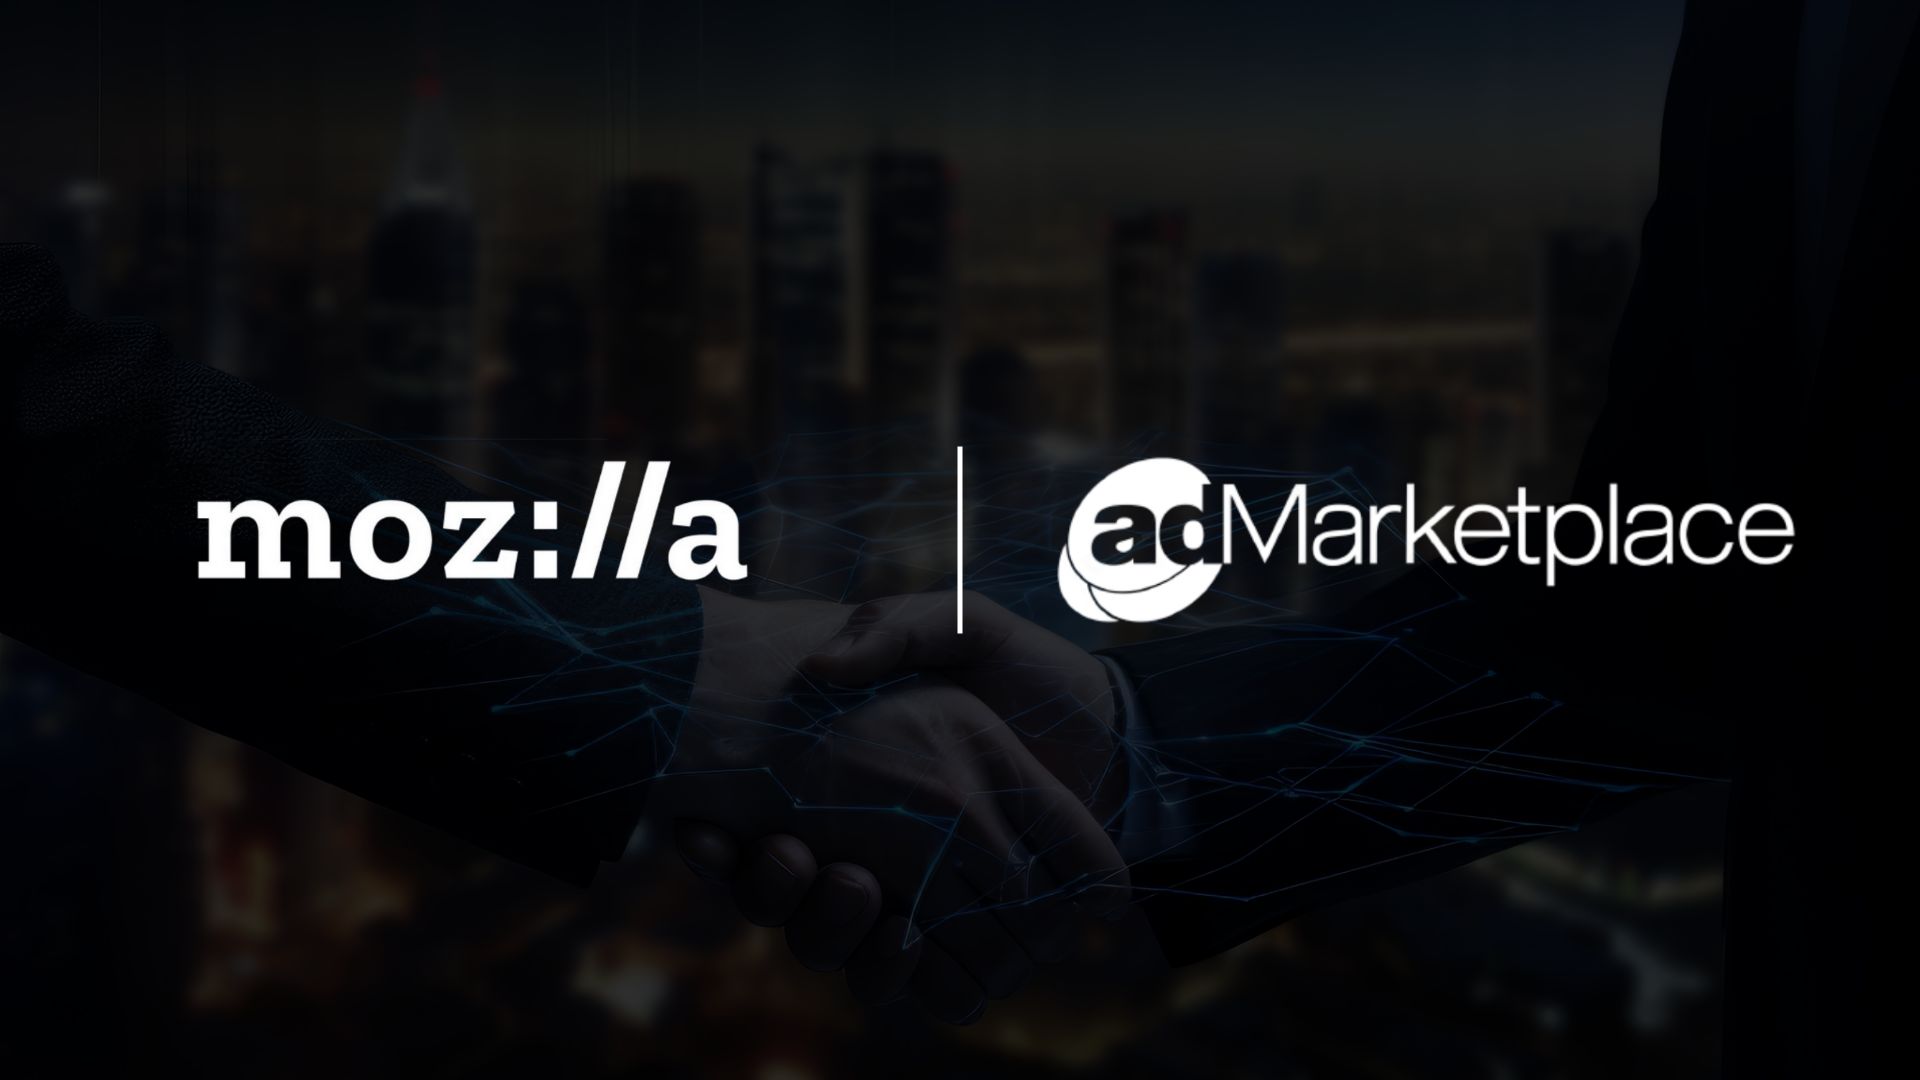 Mozilla and adMarketplace Expand Partnership for Privacy-Focused Advertising